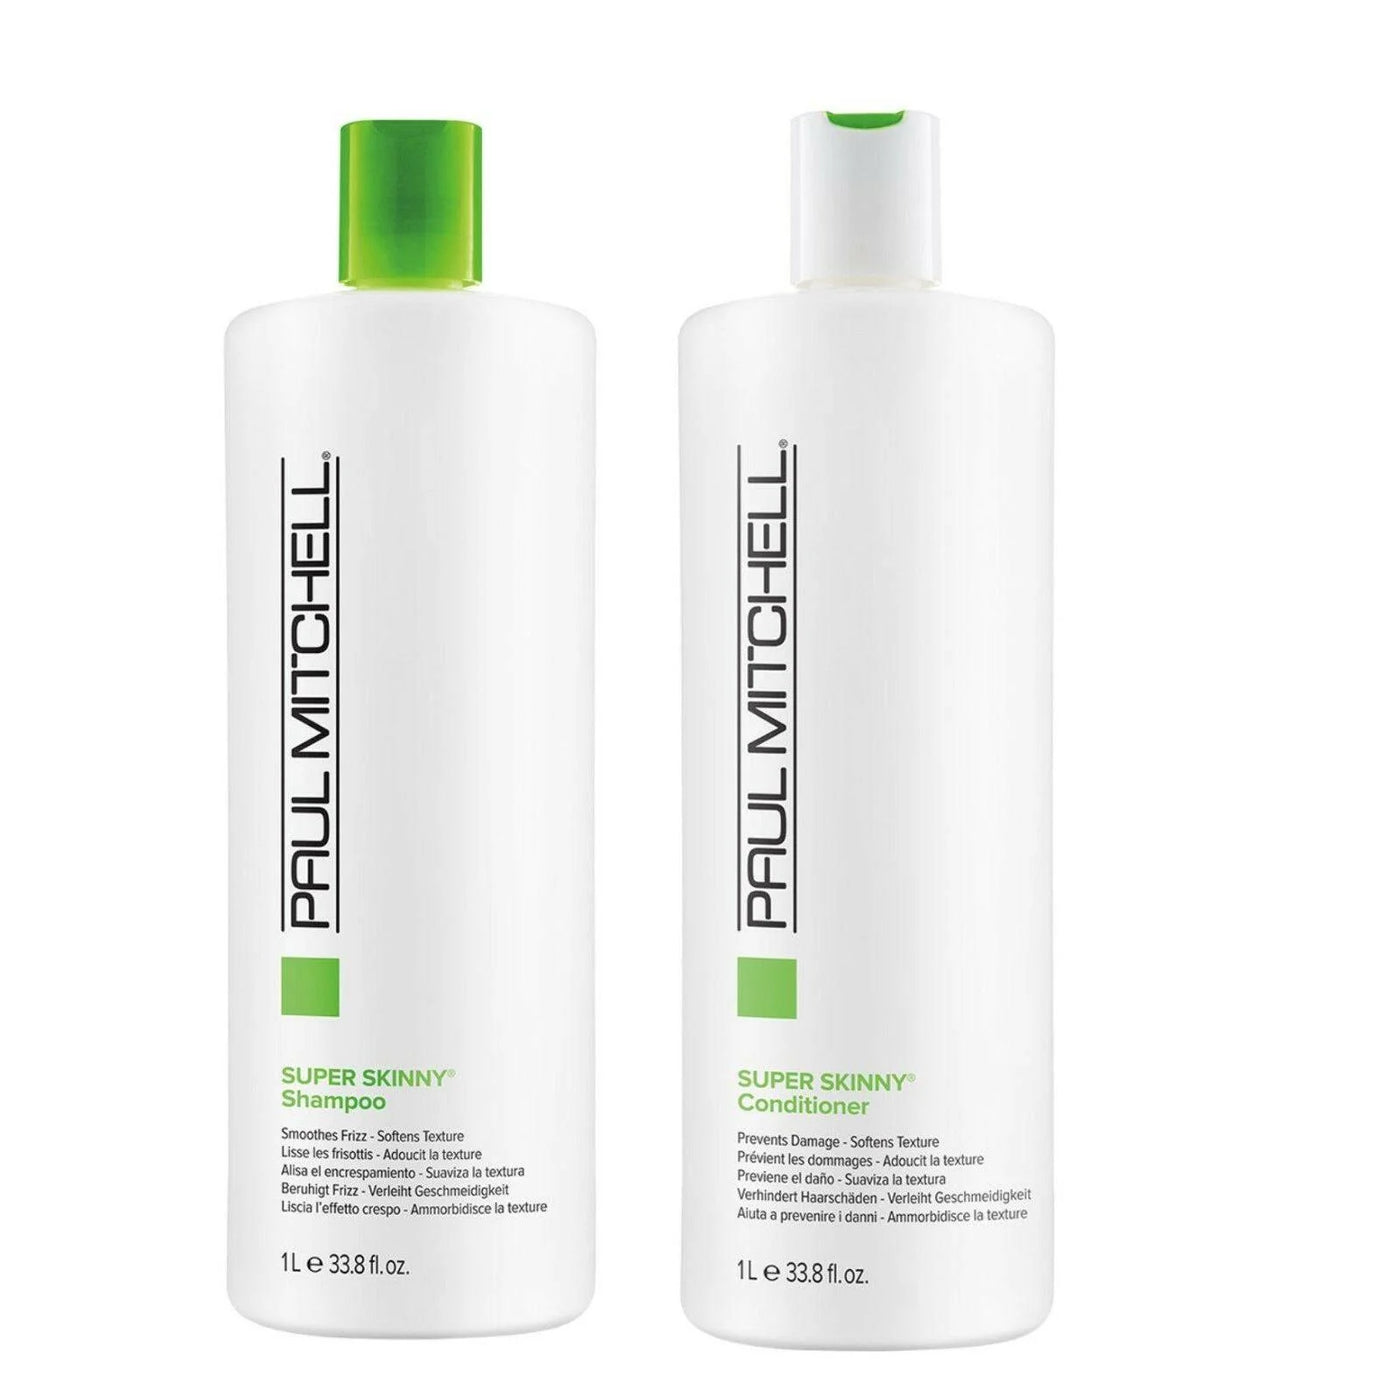 Paul Mitchell Super Skinny Shampoo and Conditioner 1000ml Duo